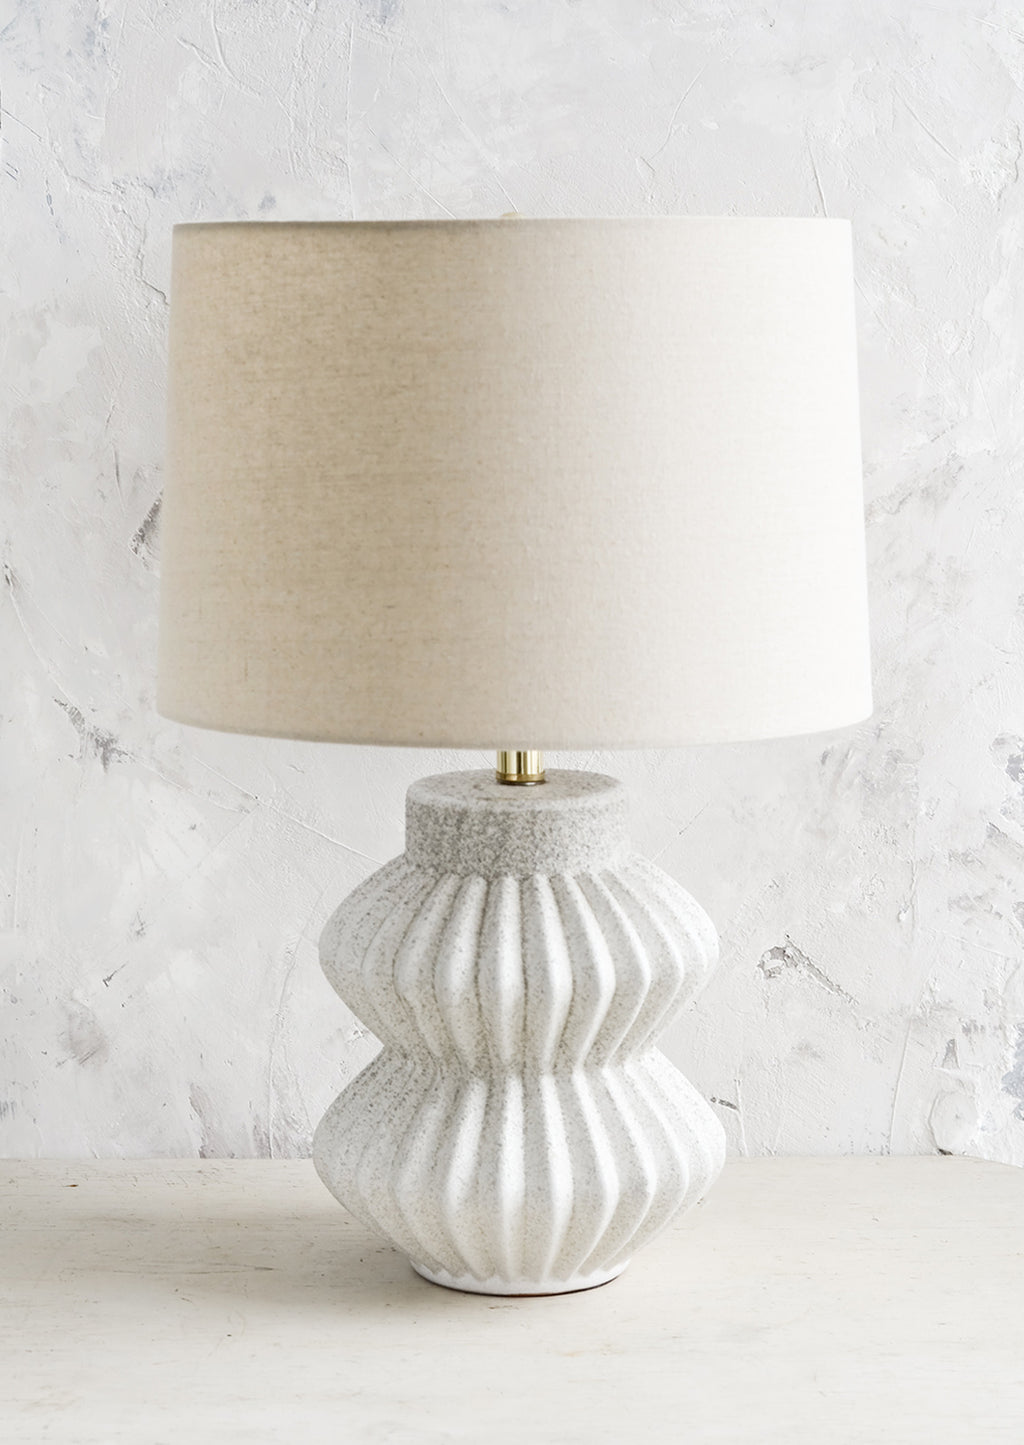 1: A table lamp with fluted ceramic base in speckled gray and natural linen shade.